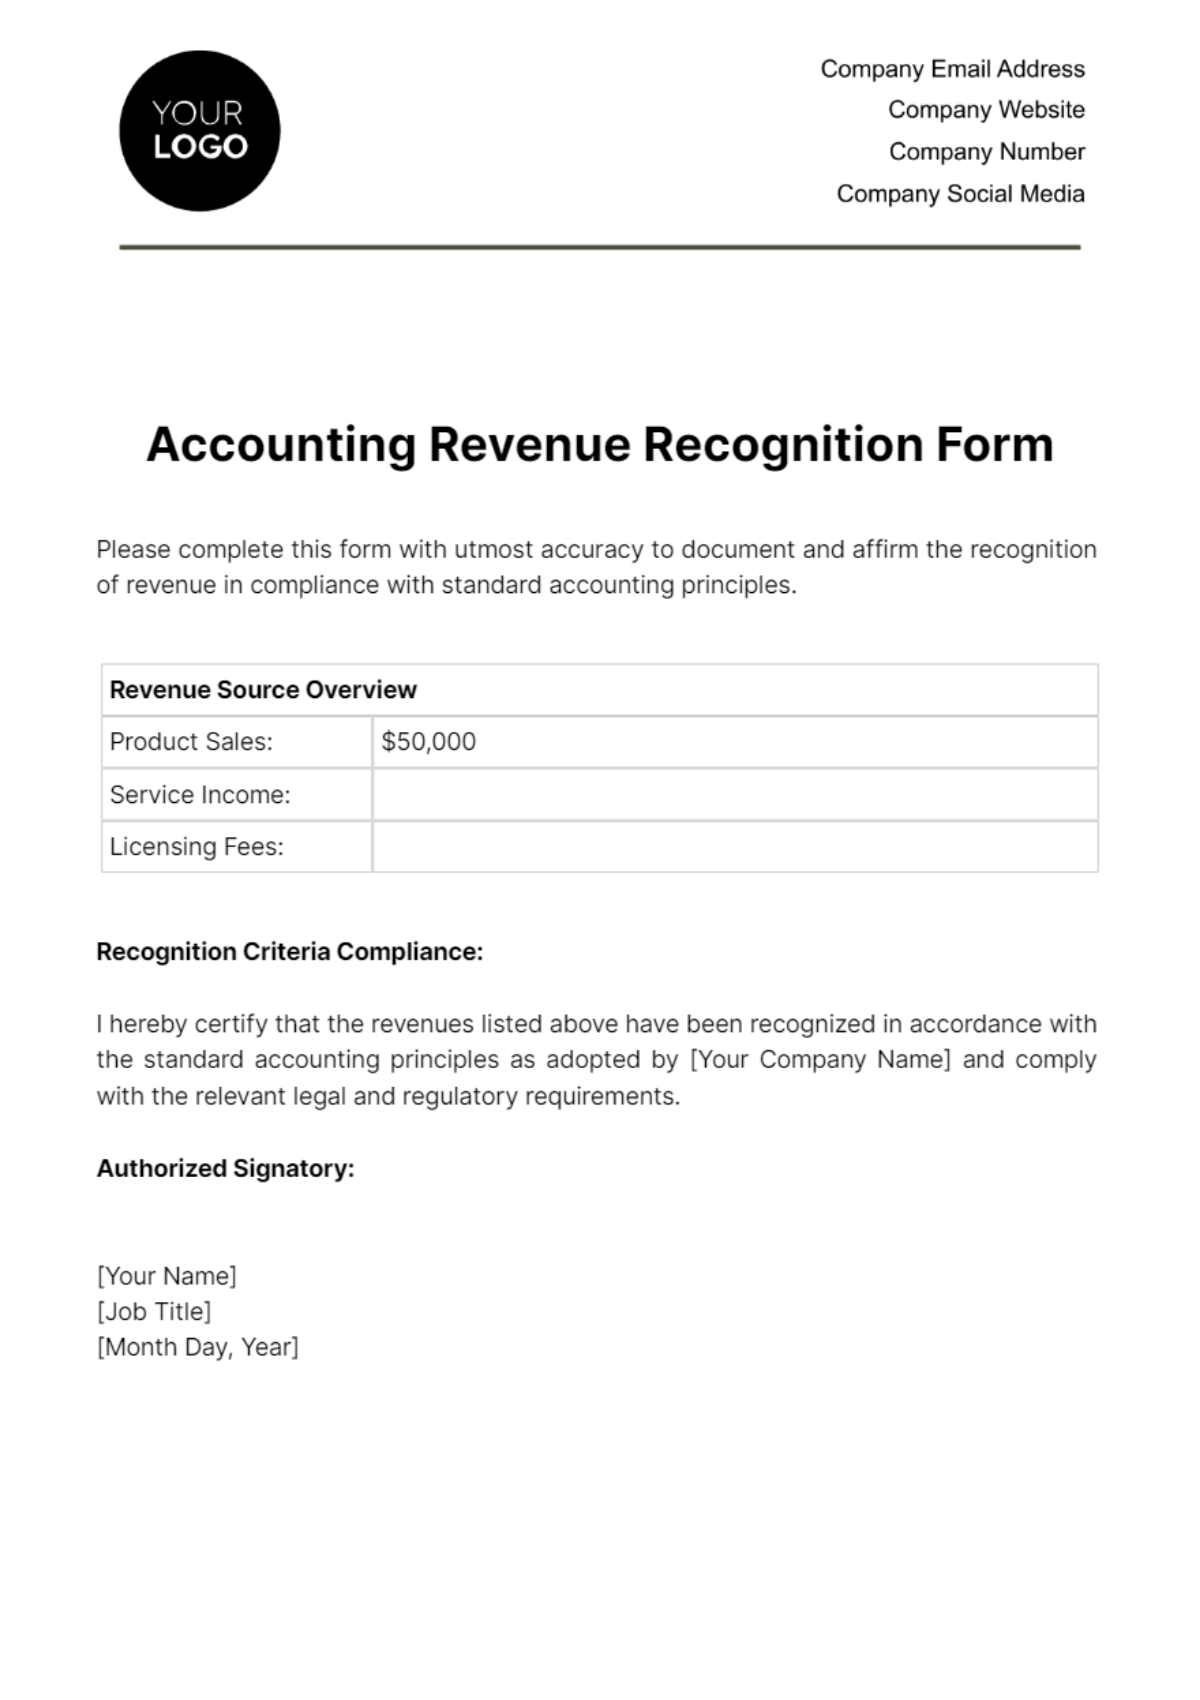 Free Accounting Revenue Recognition Form Template